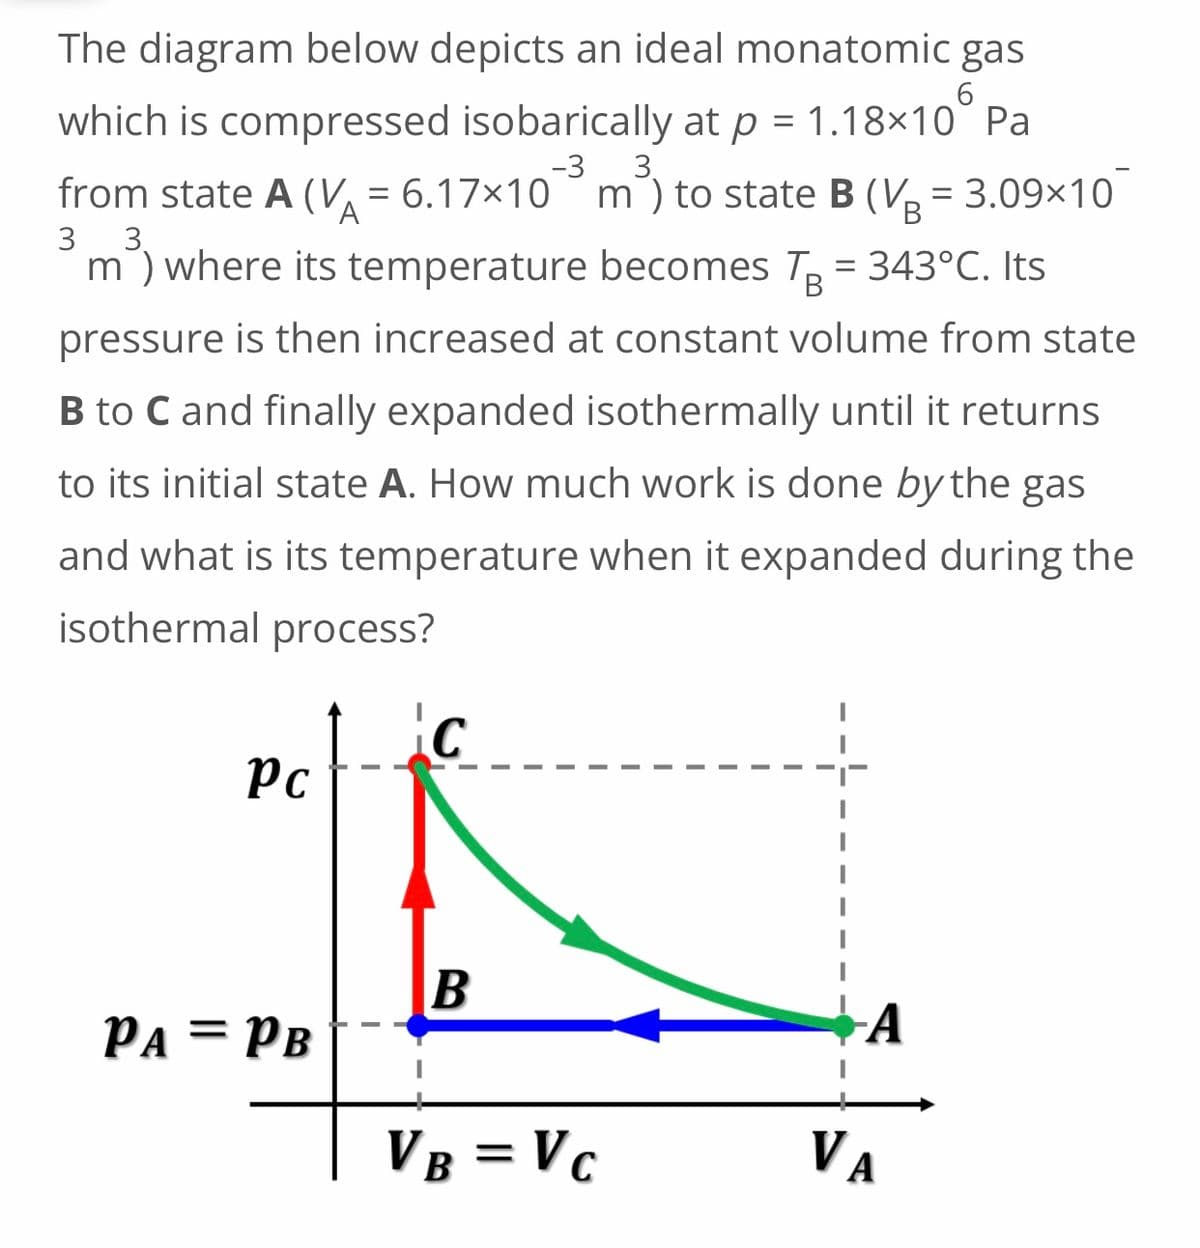 6
The diagram below depicts an ideal monatomic gas
which is compressed isobarically at p = 1.18×10 Pa
3
from state A (V₁ = 6.17×10³ m³) to state B (Vg = 3.09×10
B
A
3
3
m) where its temperature becomes TB = 343°C. Its
pressure is then increased at constant volume from state
B to C and finally expanded isothermally until it returns
to its initial state A. How much work is done by the gas
and what is its temperature when it expanded during the
isothermal process?
C
Pc
B
-A
PA PB
VB = VC
VA